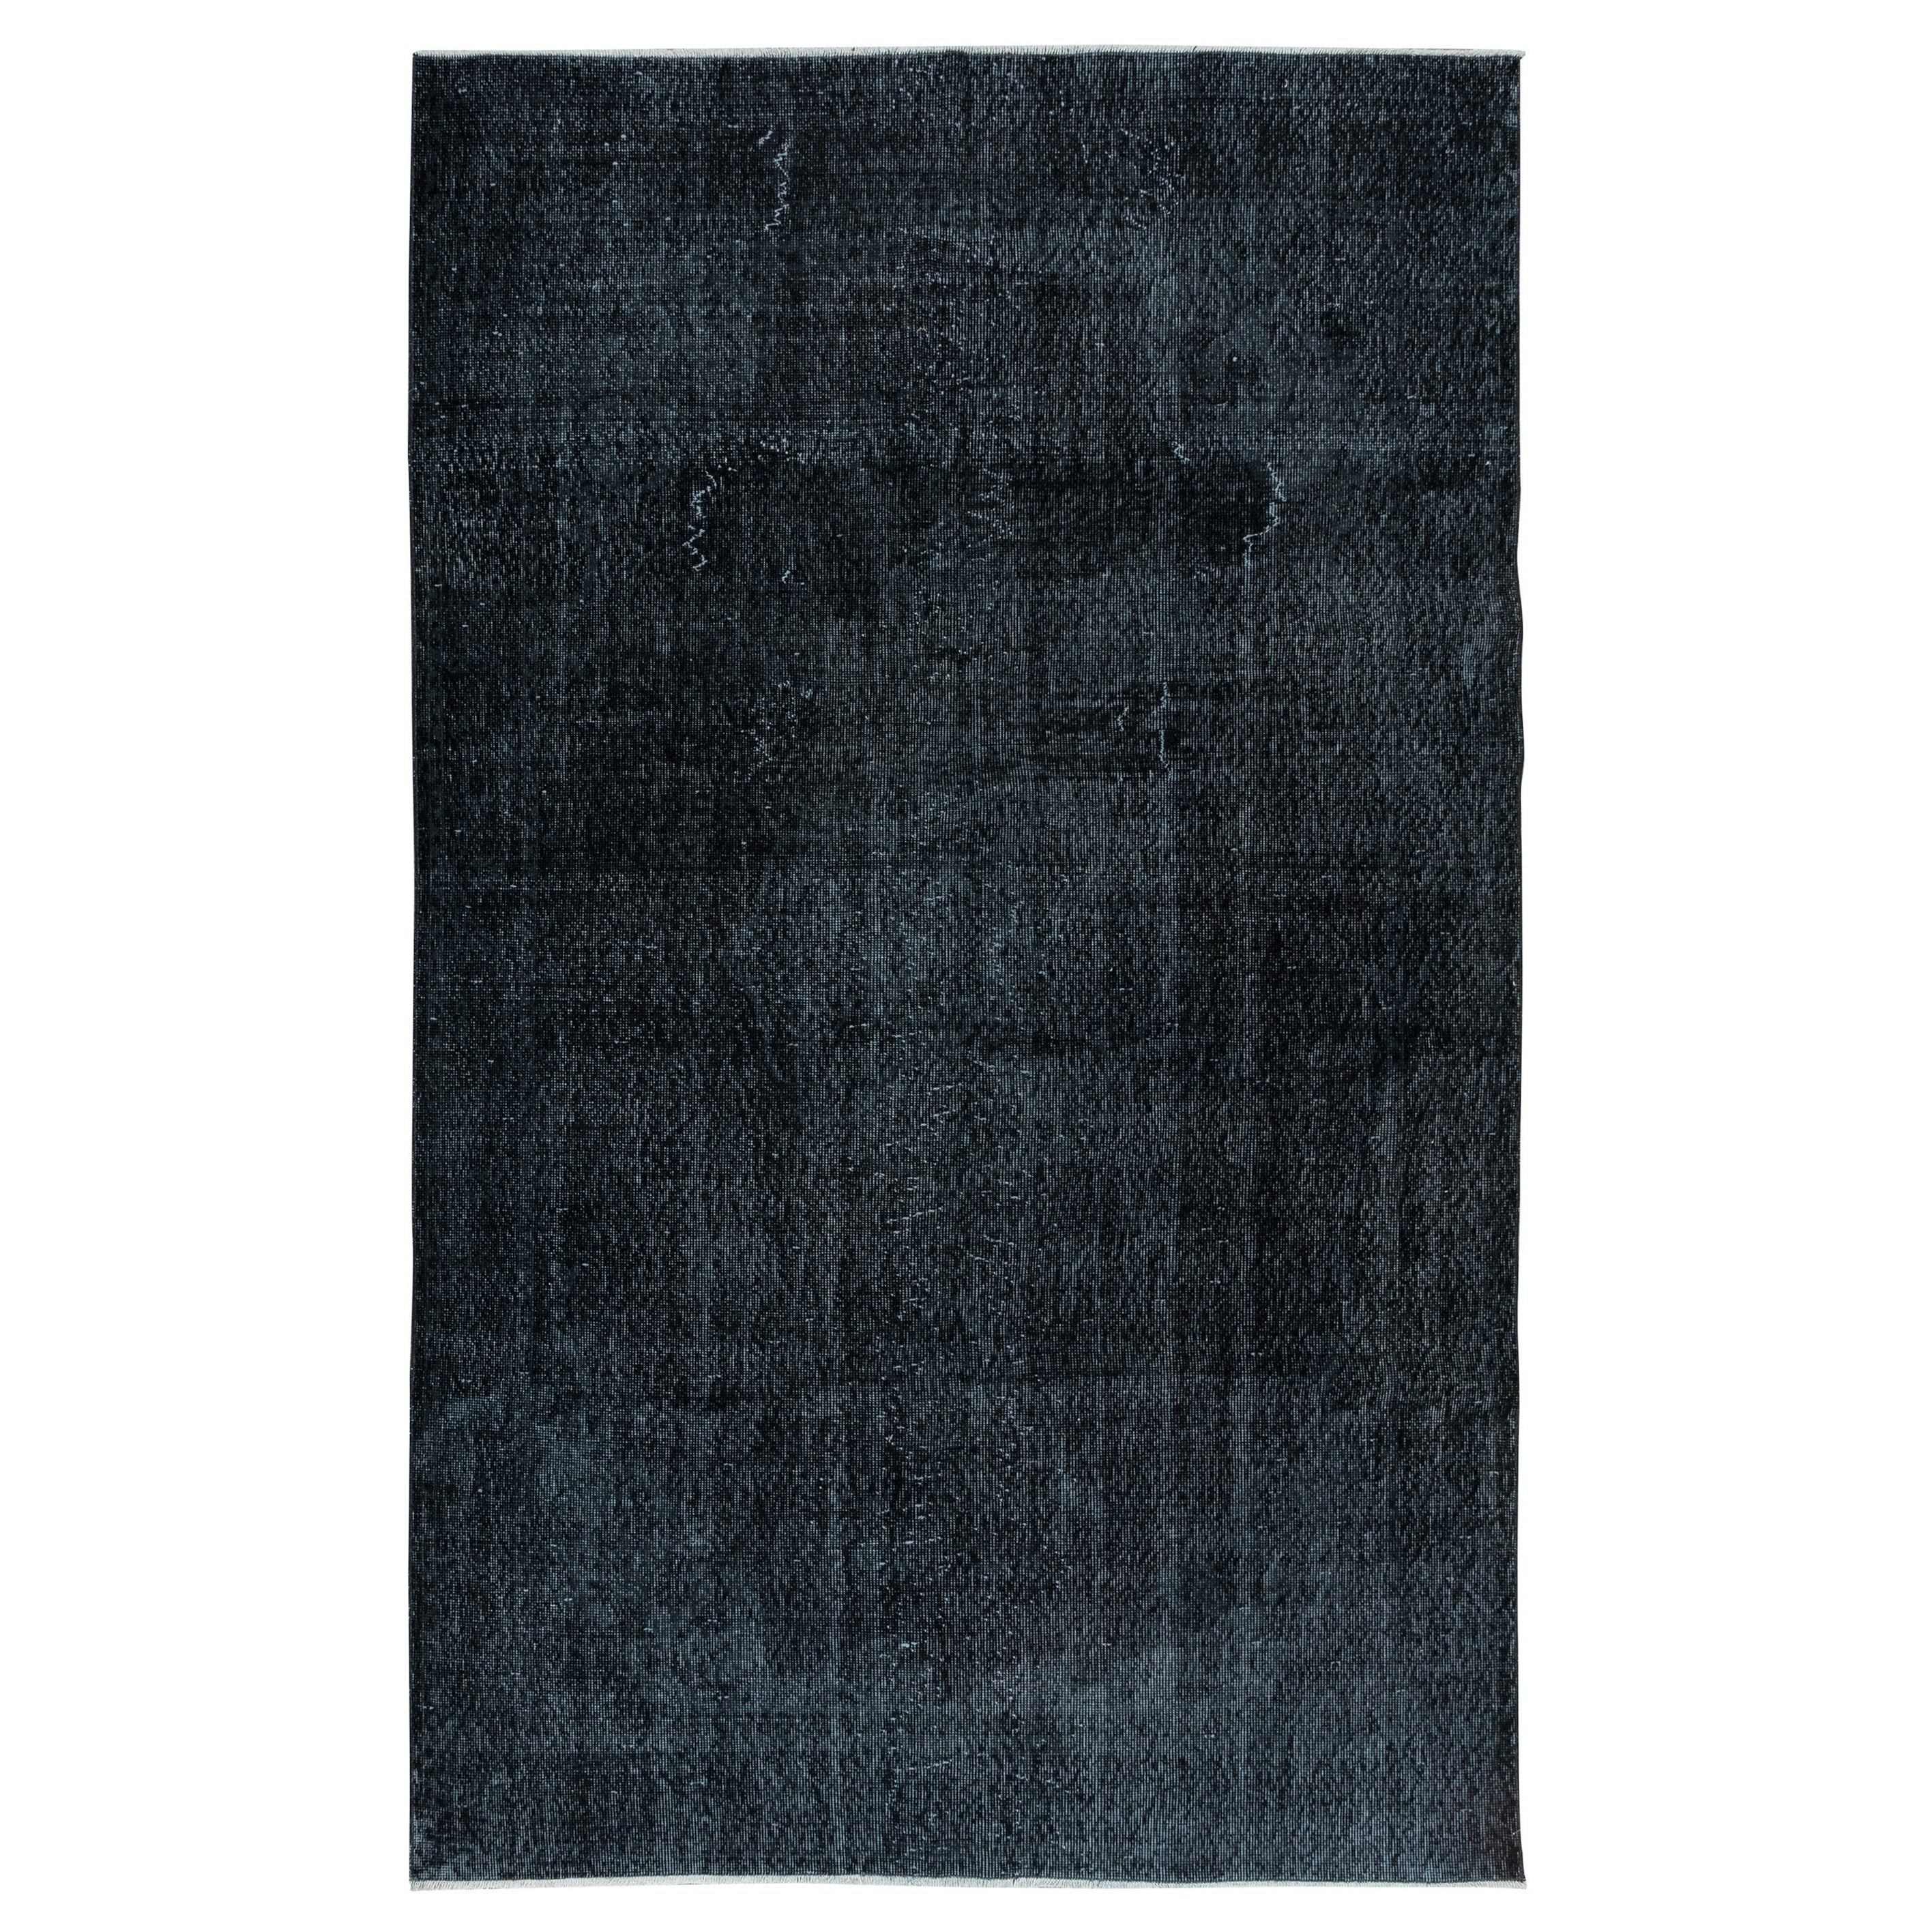 6x9.7 Ft Handmade Turkish Wool Area Rug in Gray and Black 4 Modern Interiors For Sale